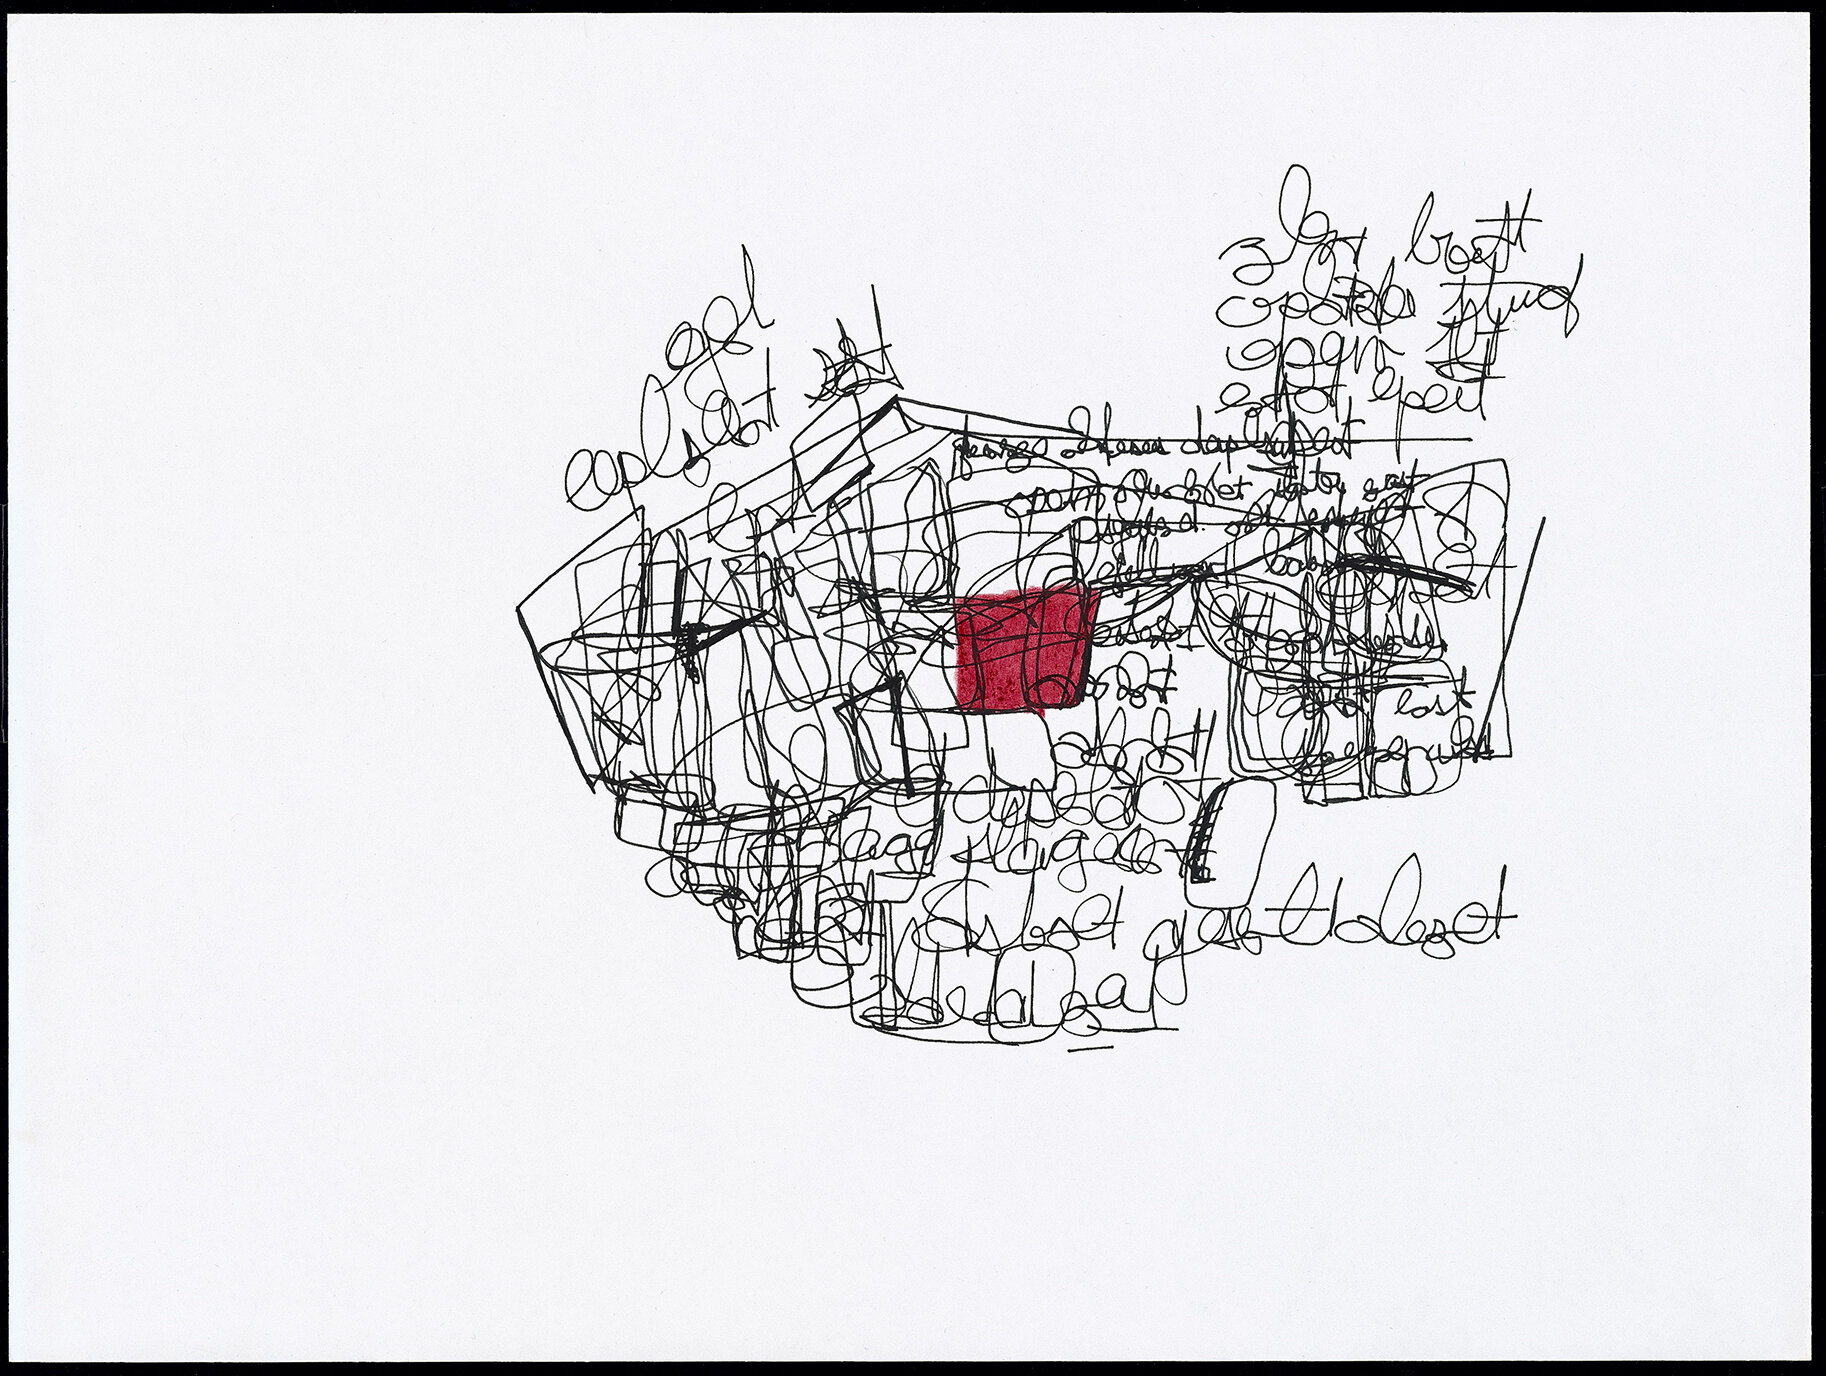  Renee Gladman, Prose Architectures 210, ink and colored pencil on paper, 9 x 12 inches, 2014. 